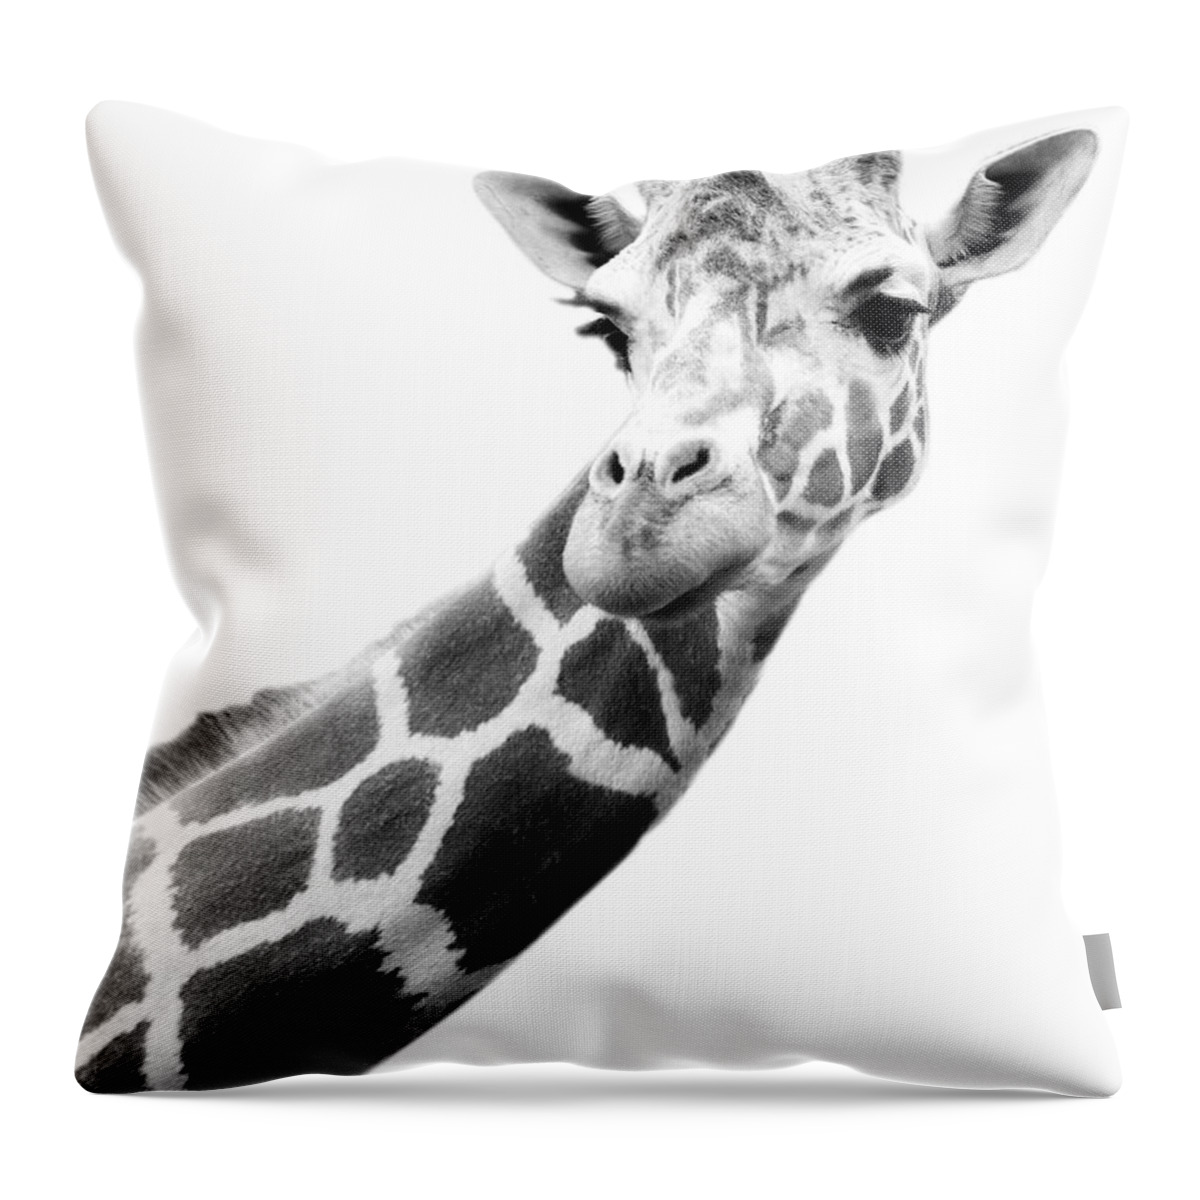 Long Throw Pillow featuring the photograph Black And White Portrait Of A Giraffe by Design Pics